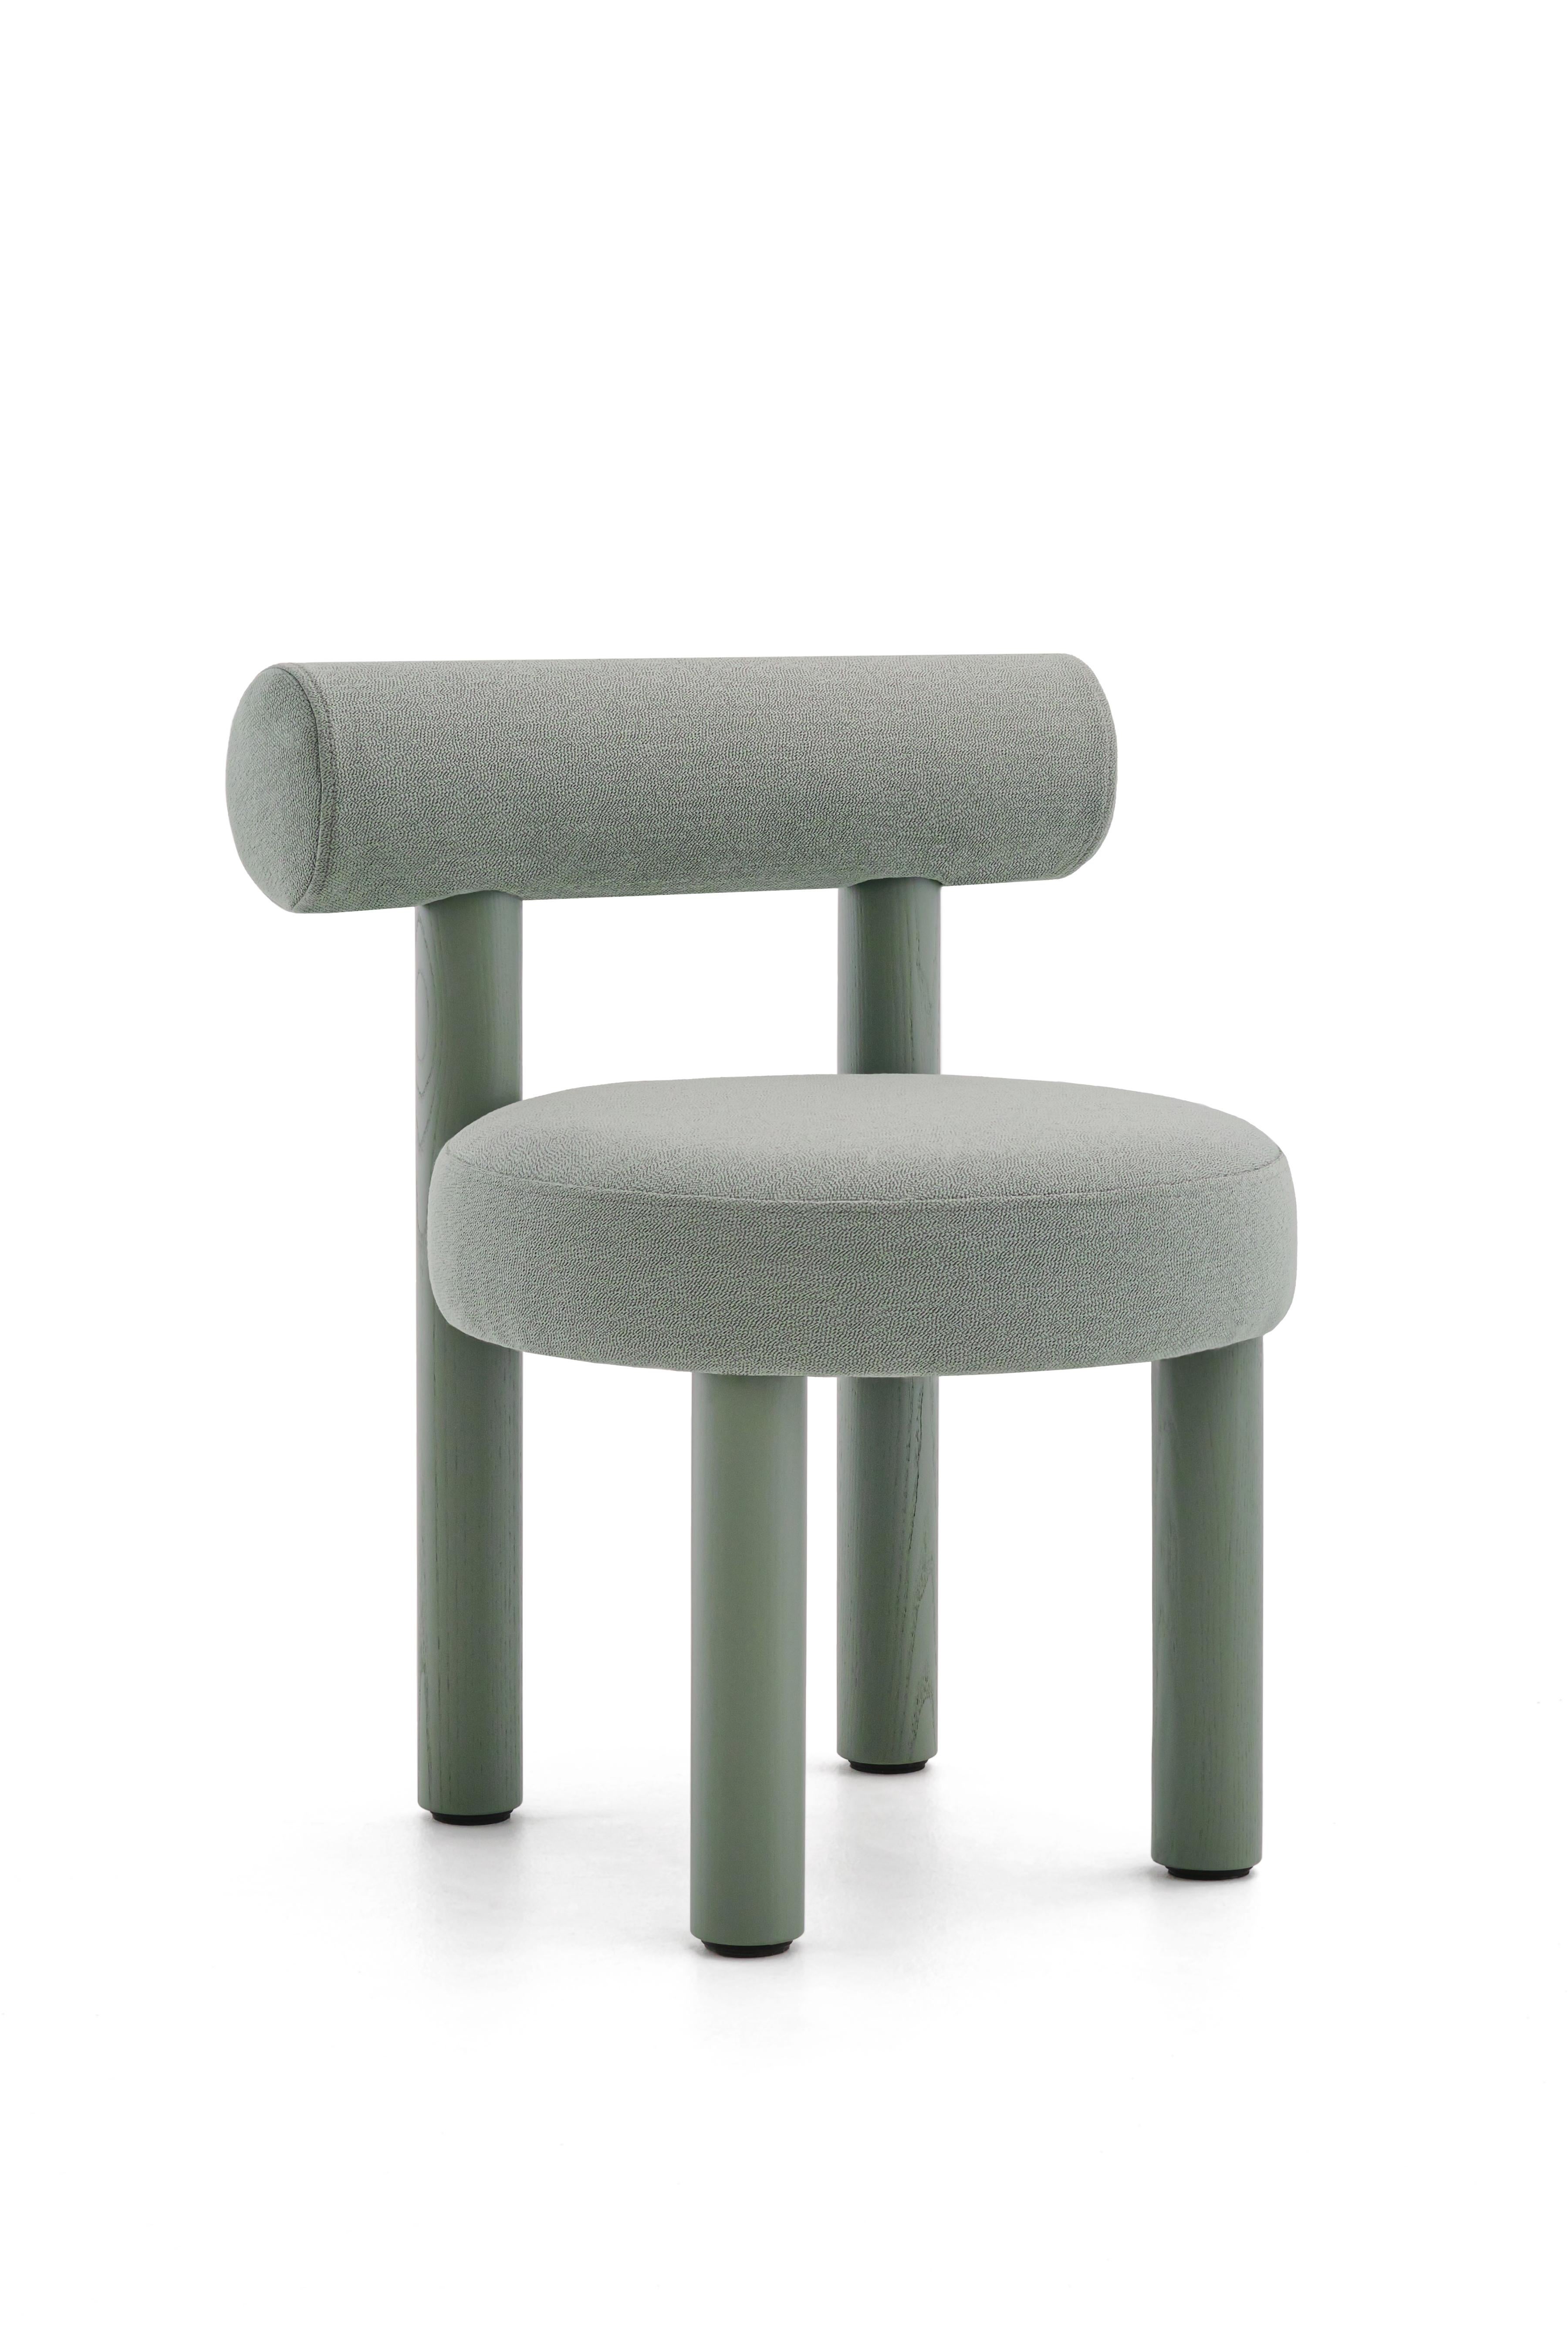 Contemporary Wooden Chair 'Gropius Cs2' by Noom, Arco Rohi Aqua For Sale 3